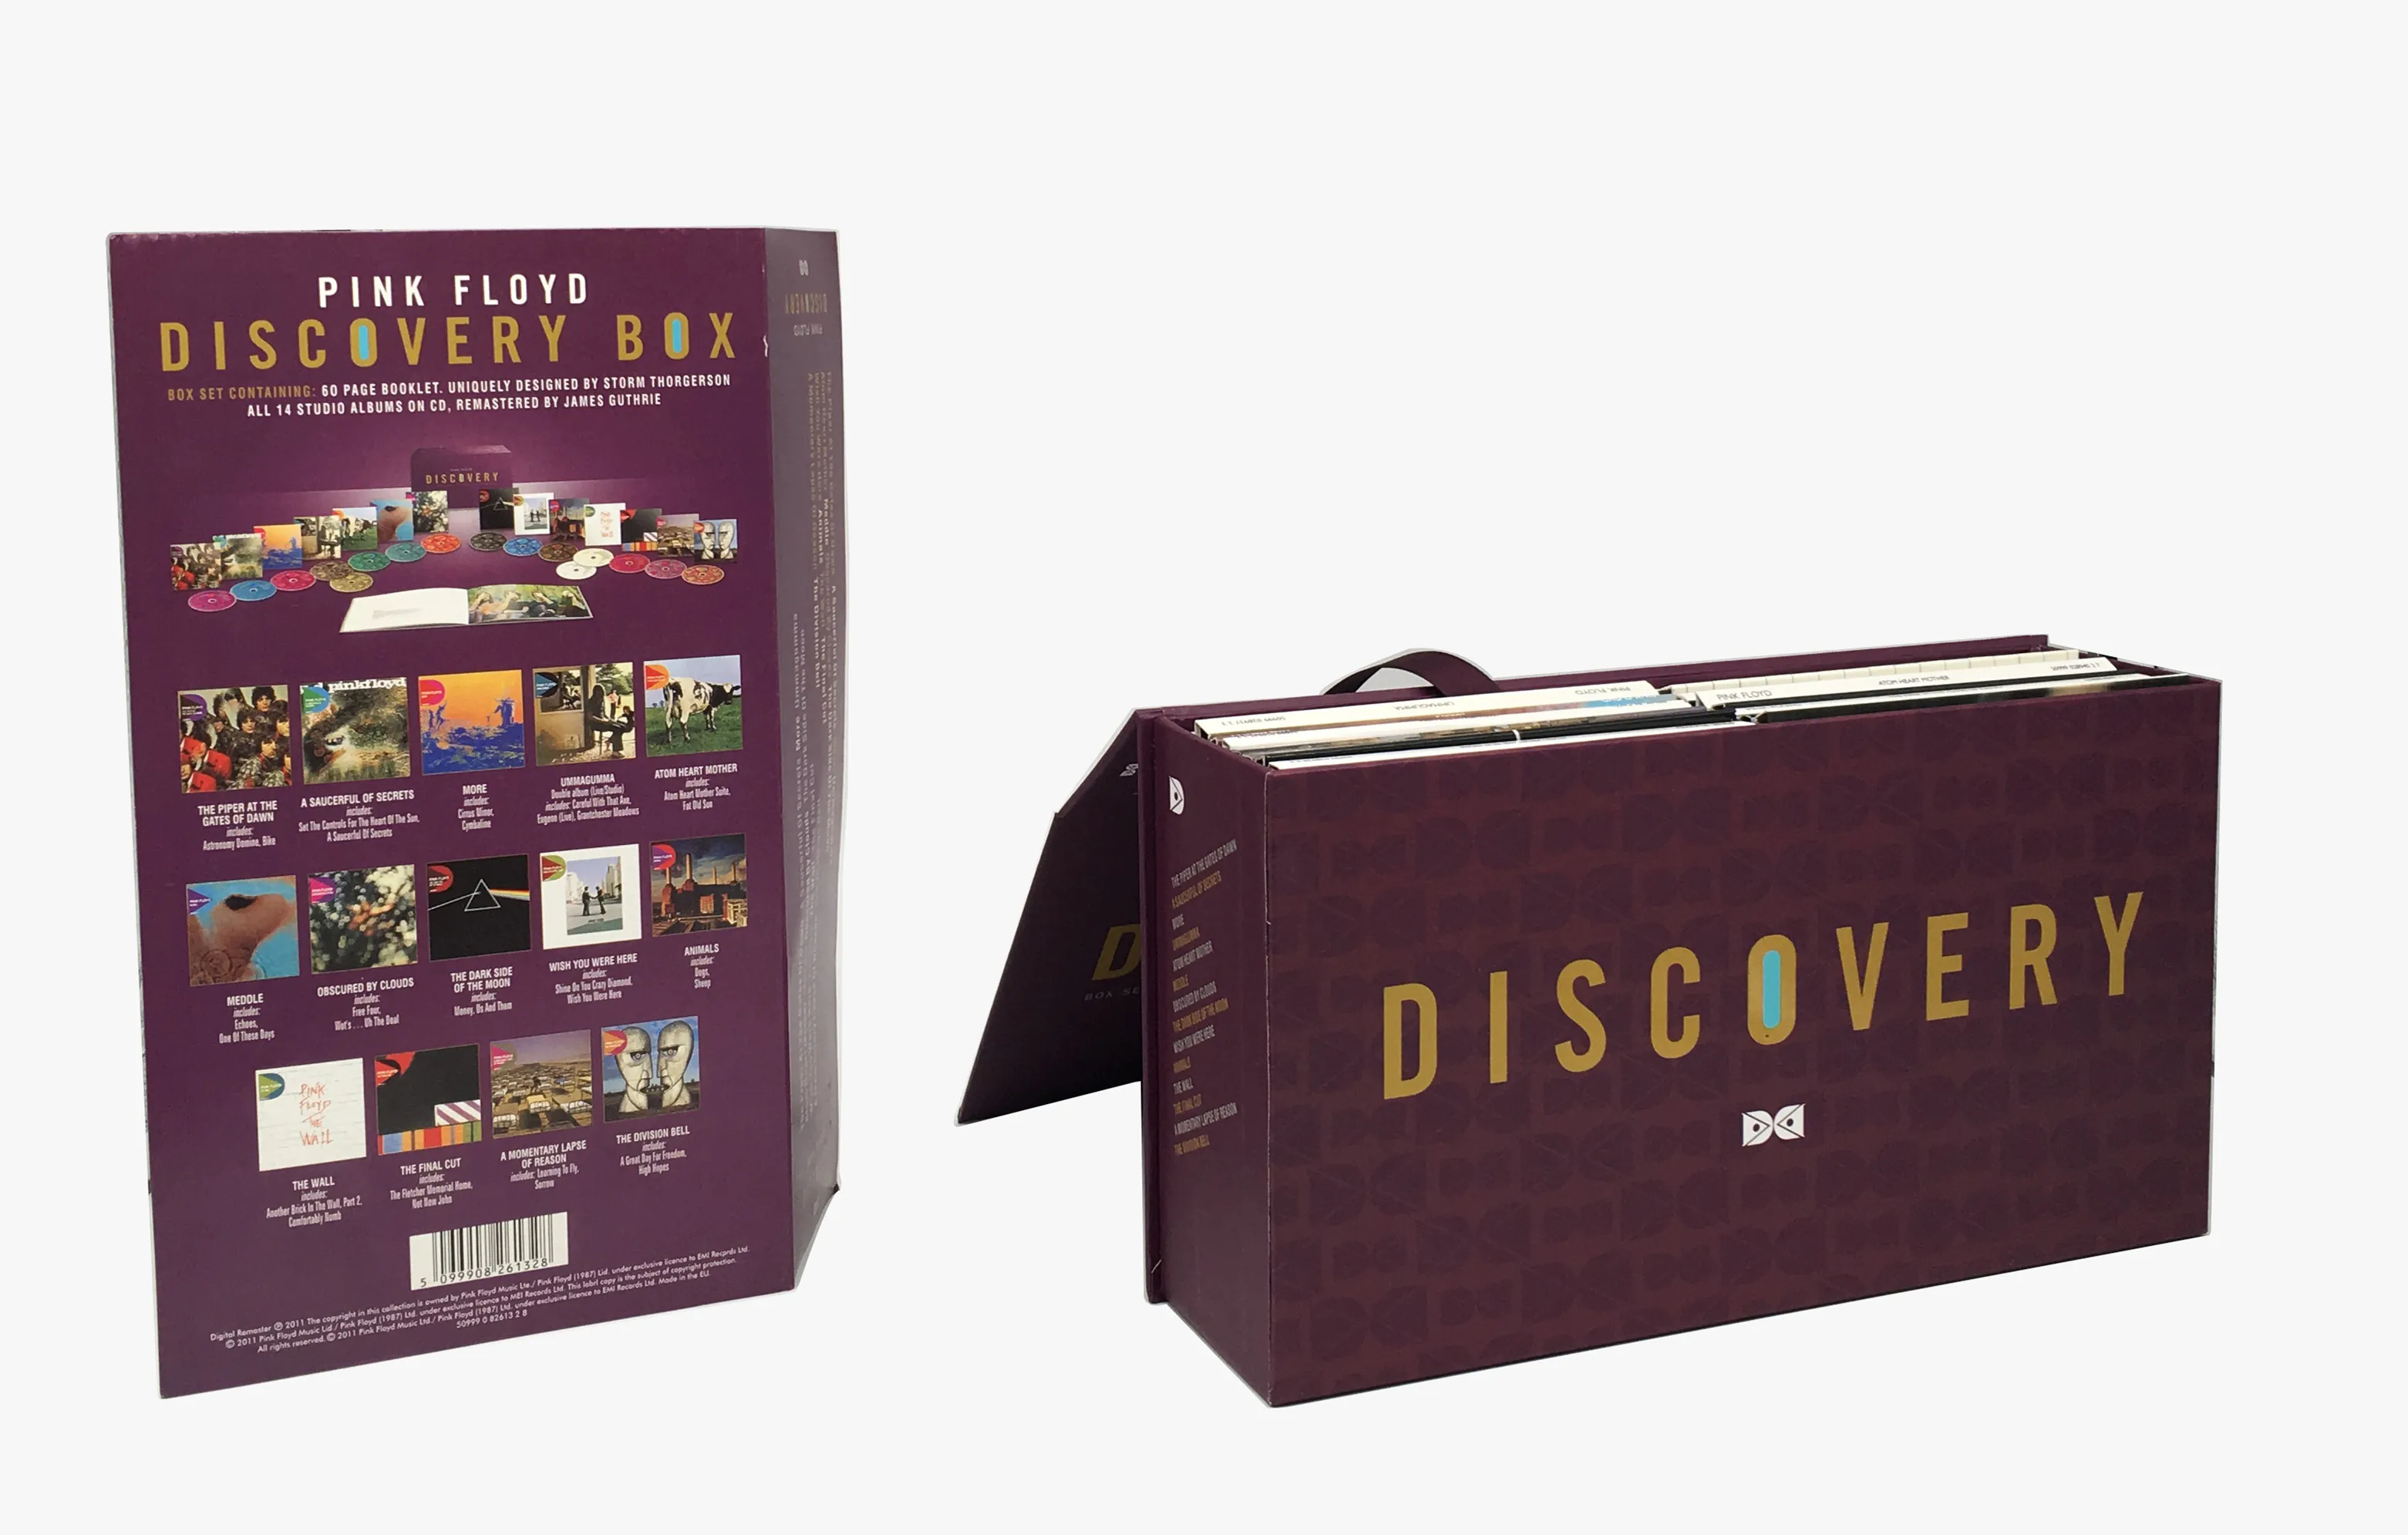 Pink Floyd Discovery Box Set 16 Cd Collection Containing 14 Studio Albums  And Unique Sixty Page Booklet Best Christmas Gift - Buy Dvd Movies,Tv  Series Box Set,Cd Product on Alibaba.com